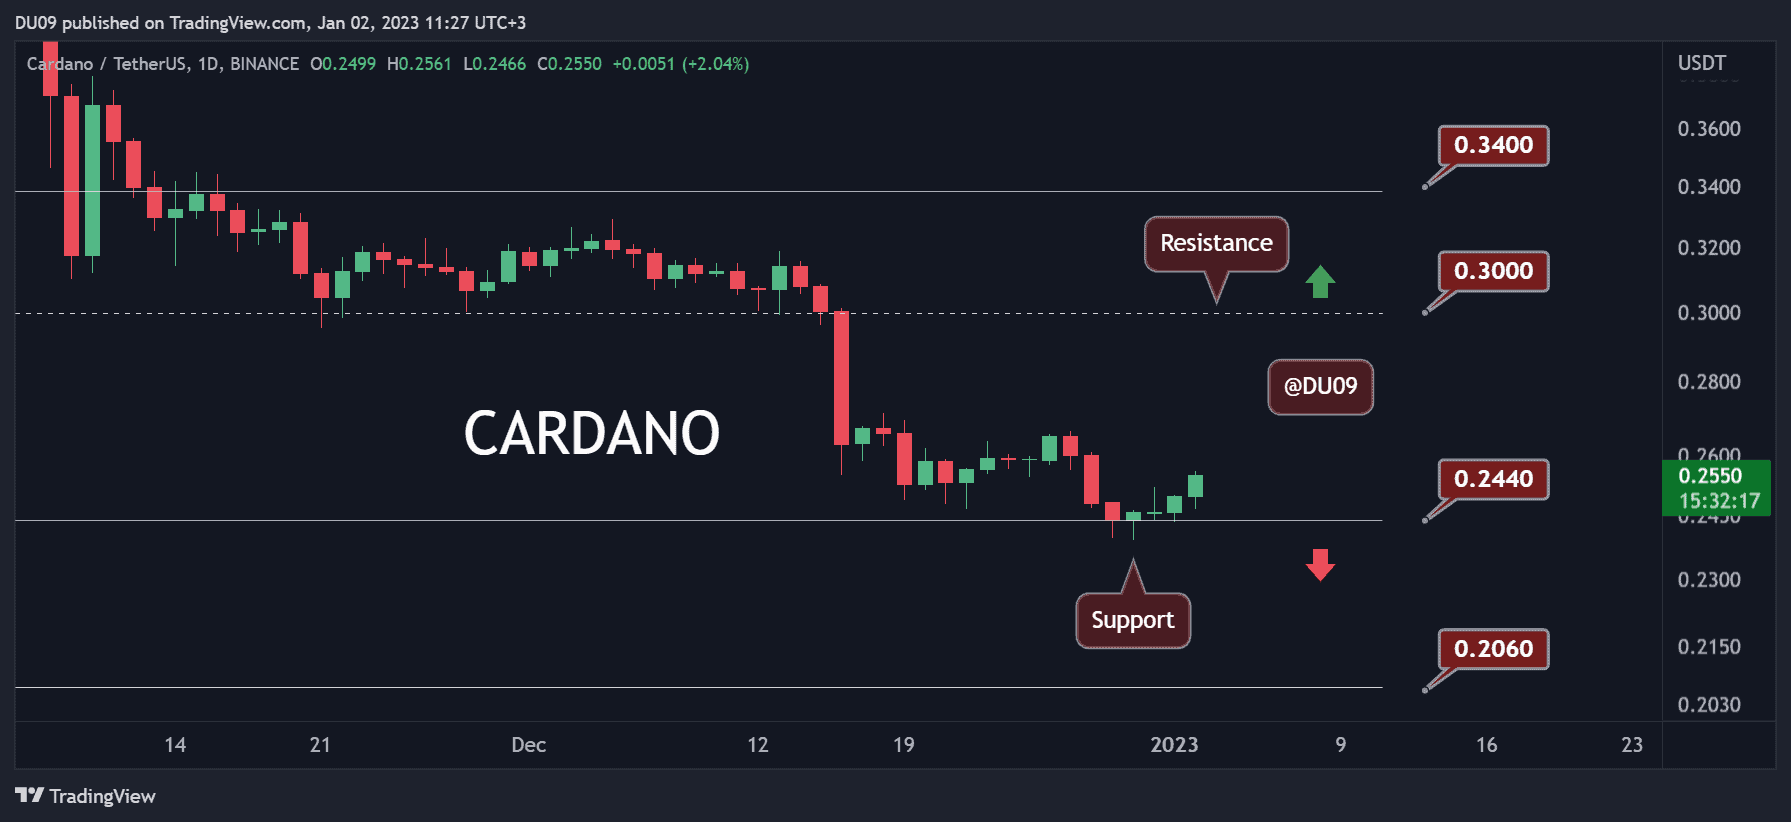 Cardano-spikes-4%-in-a-day,-but-is-the-worst-over?-(ada-price-analysis)